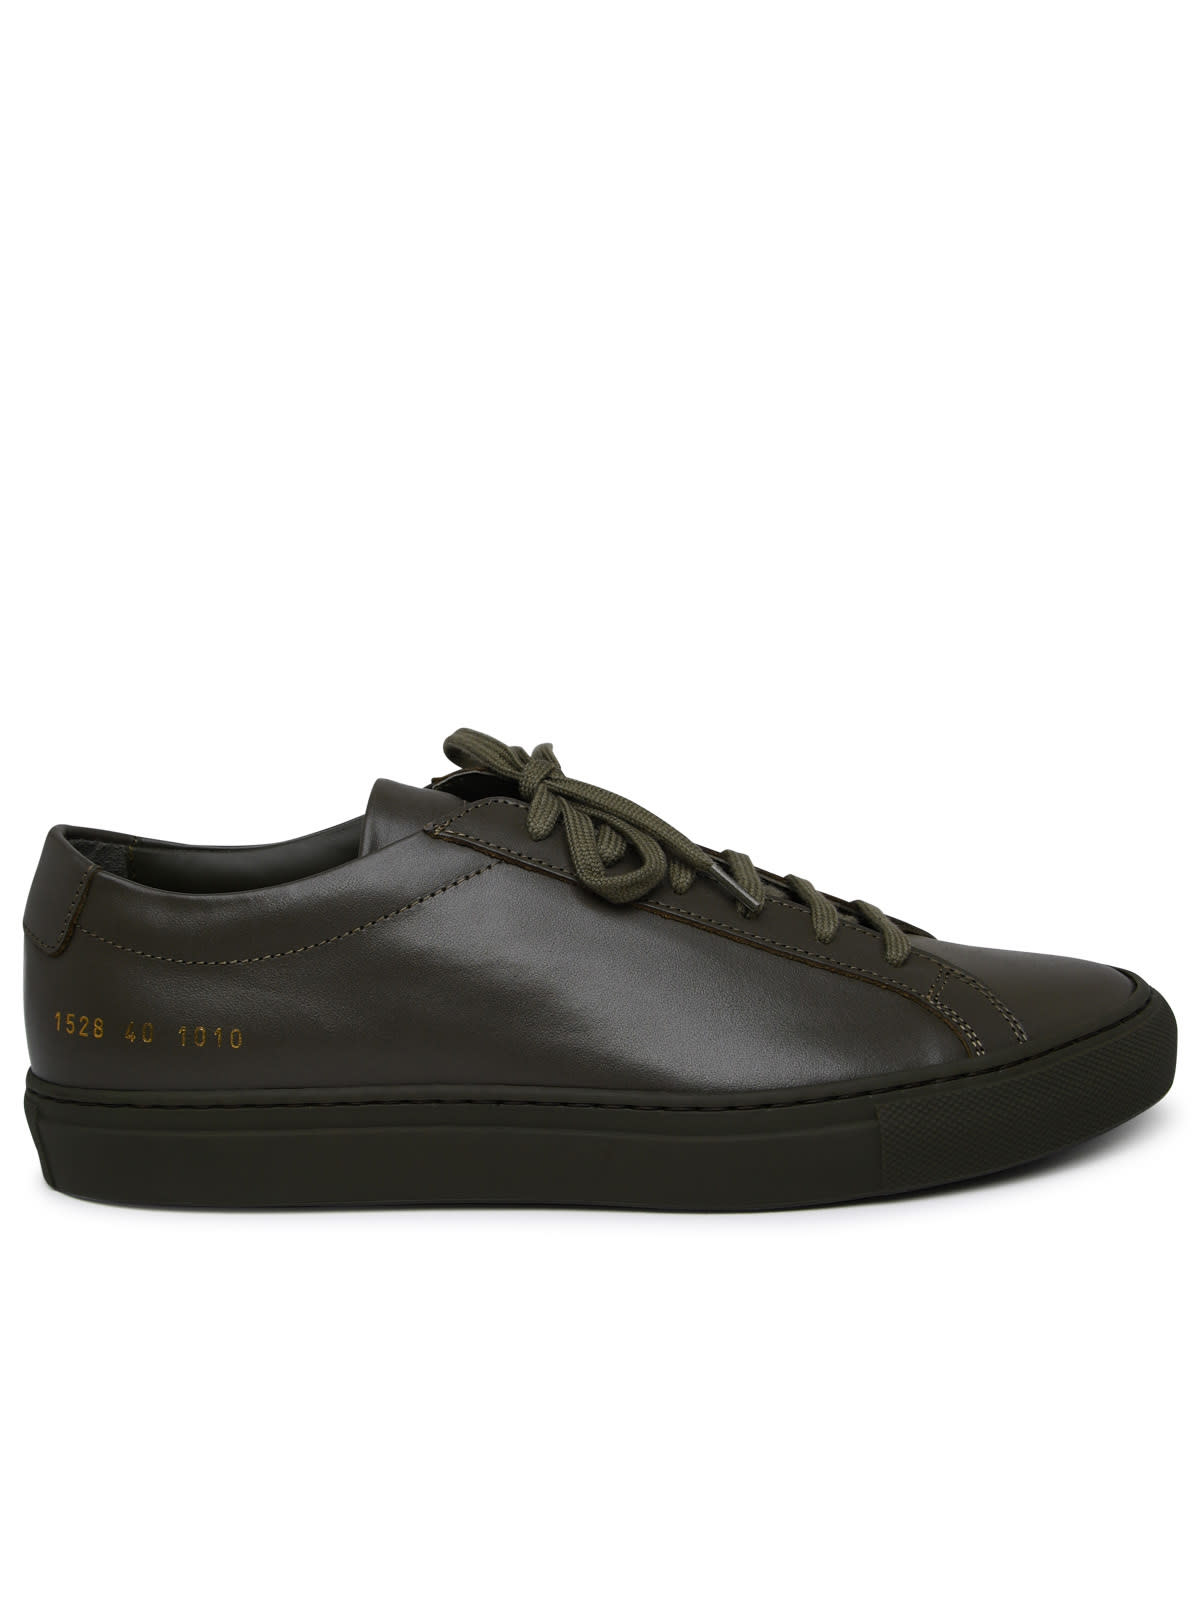 COMMON PROJECTS GREEN LEATHER ACHILLES SNEAKERS